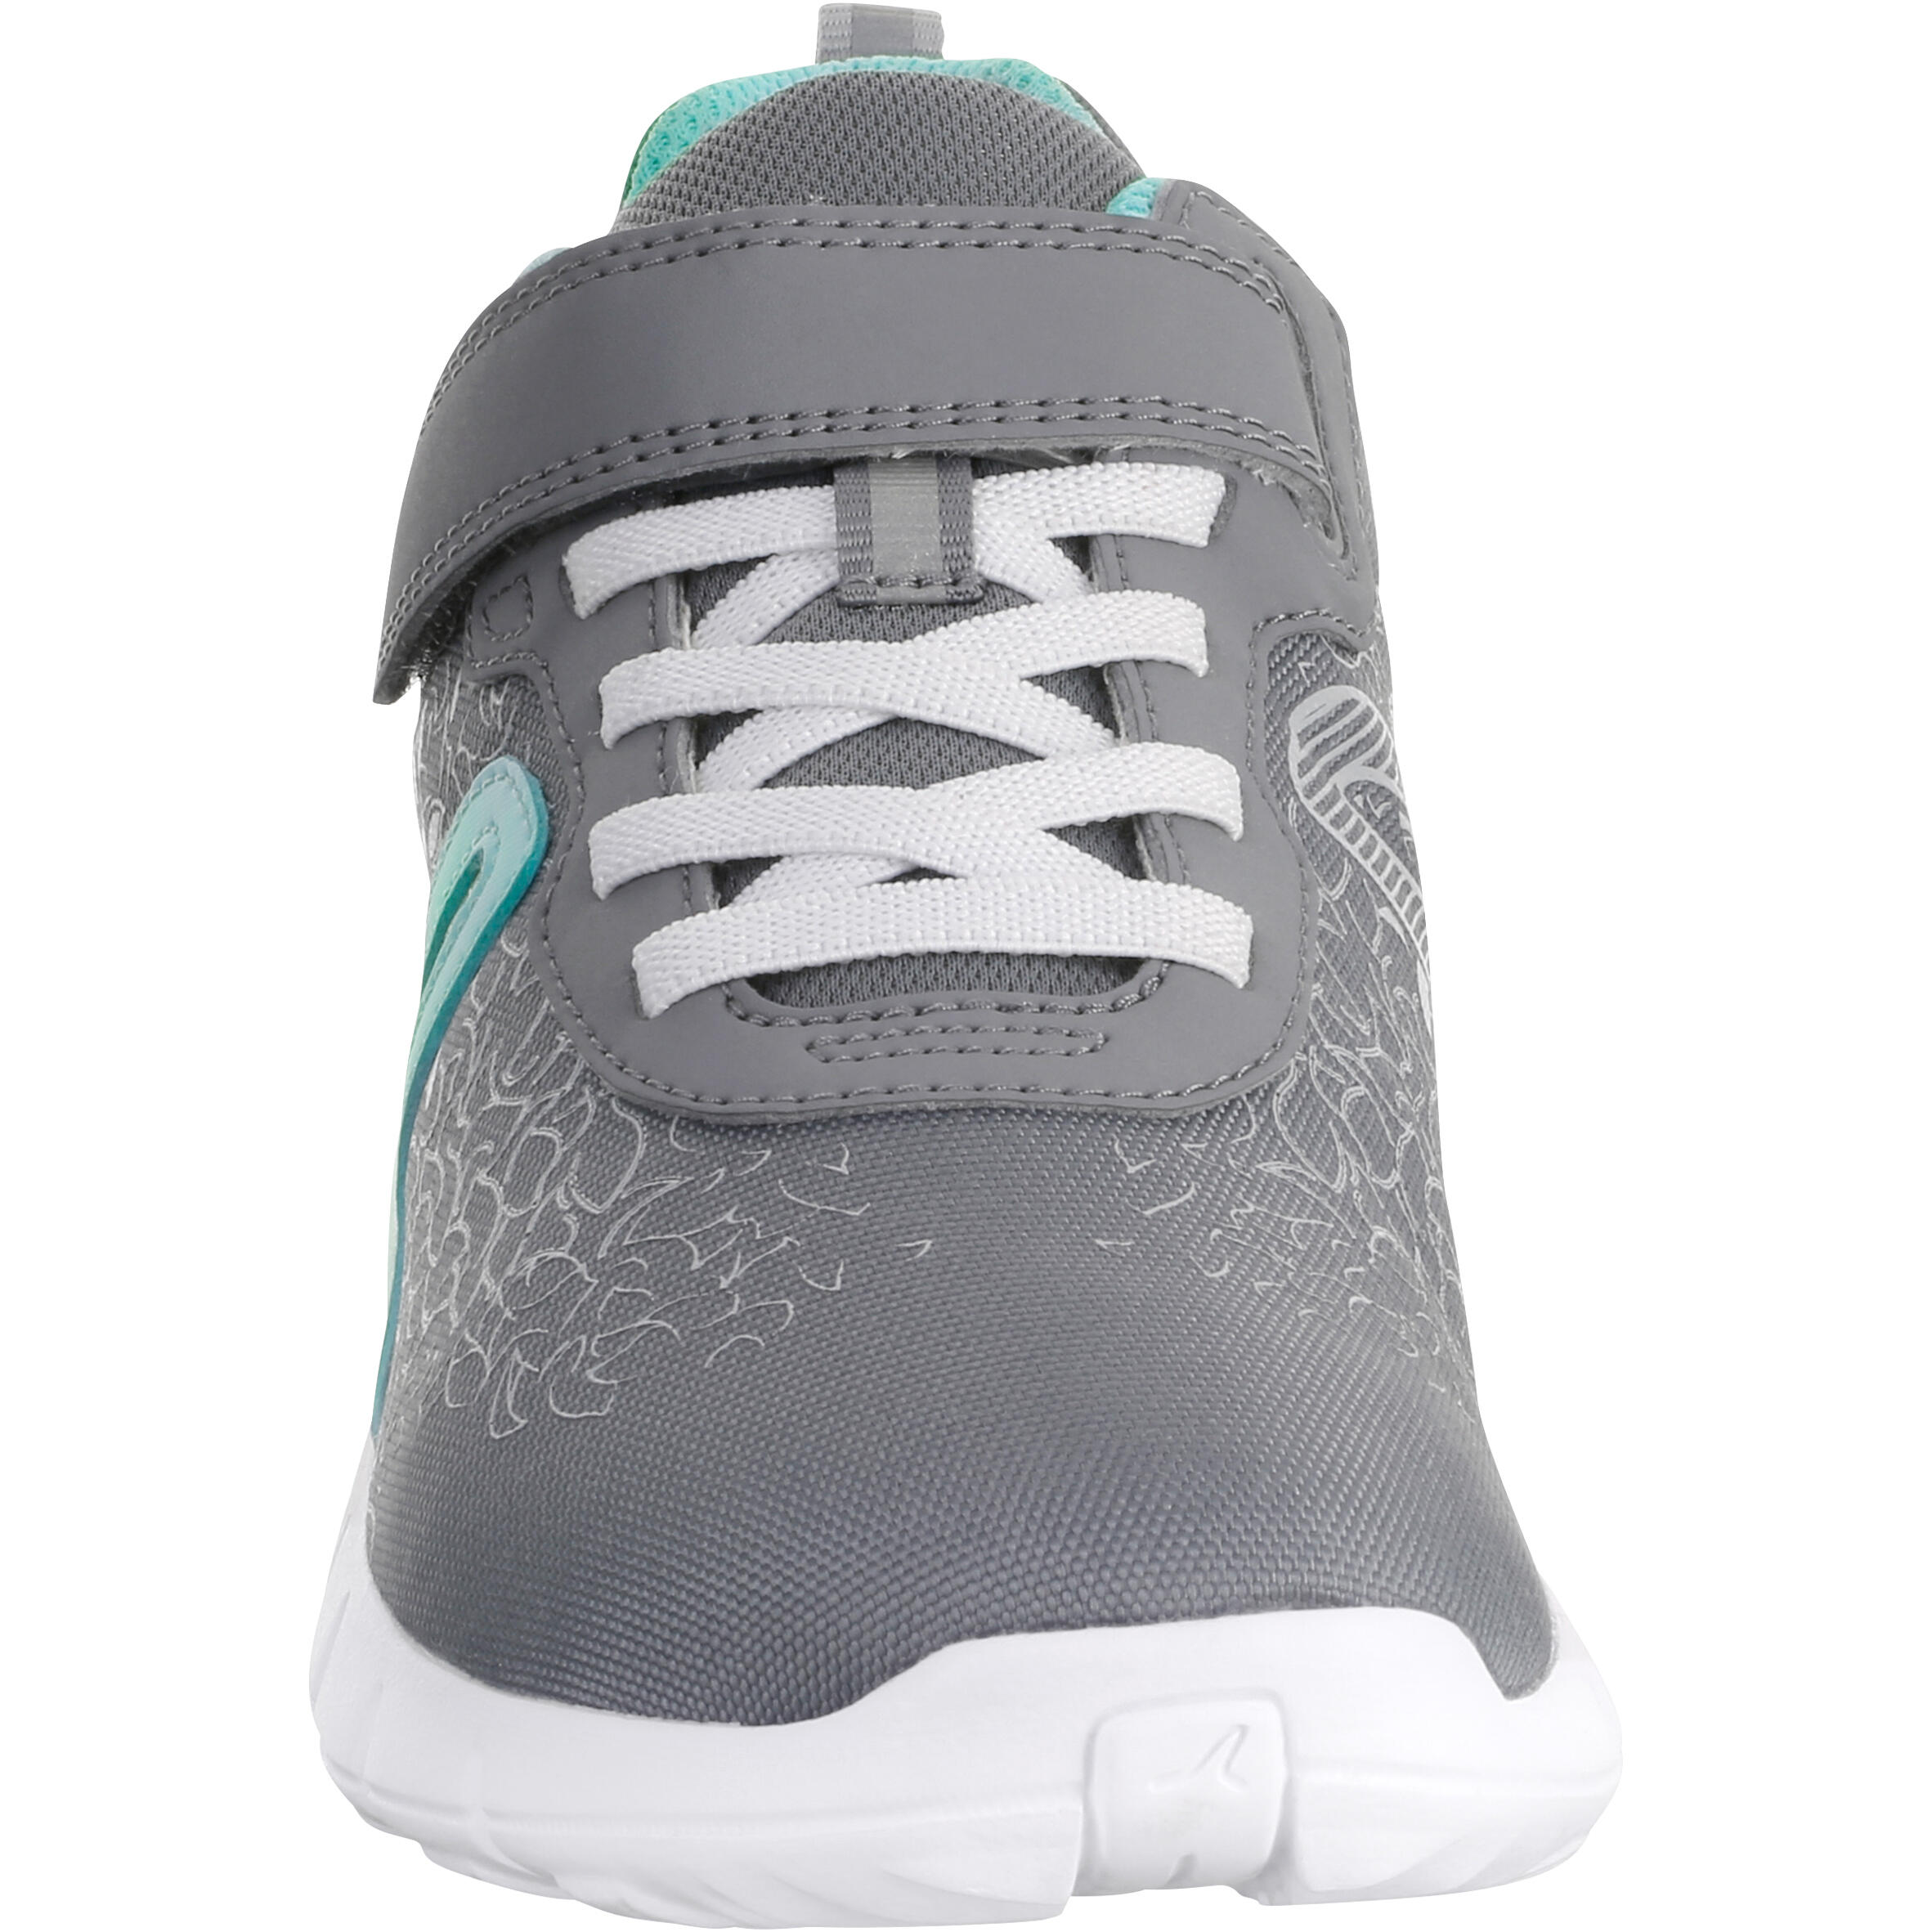 Soft 140 children's fitness walking shoes grey/turquoise 5/12